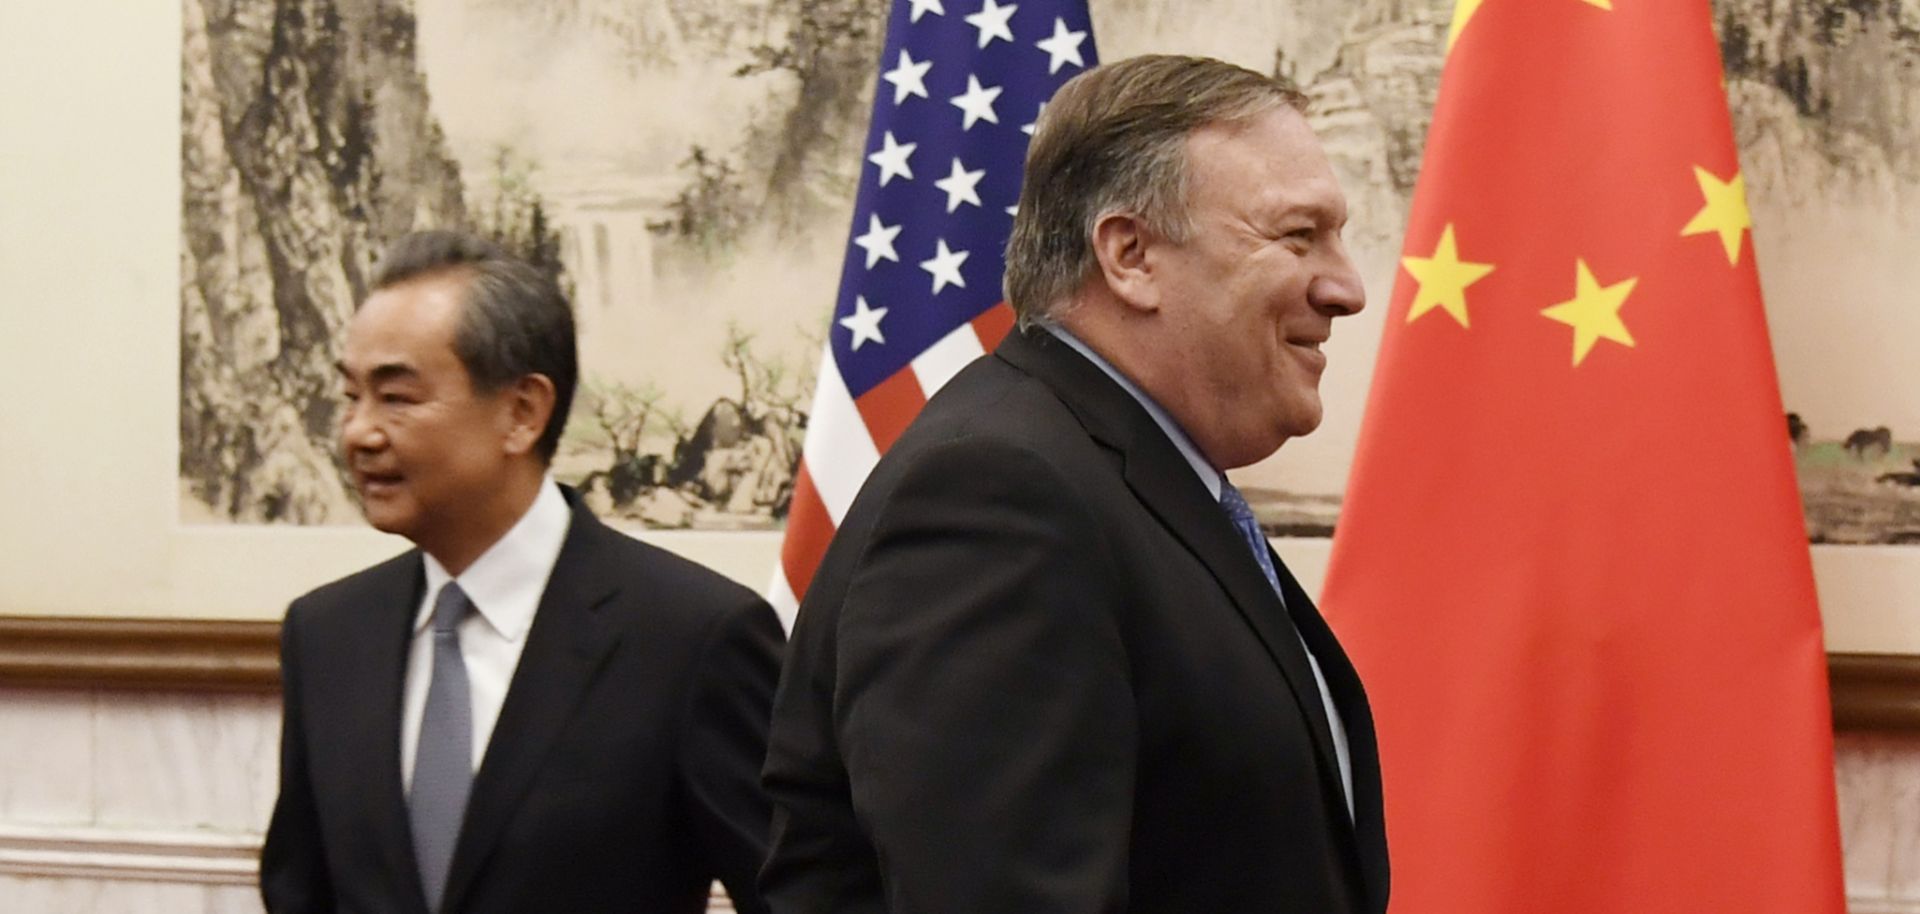 Chinese Foreign Minister Wang Yi (L) greets U.S. Secretary of State Mike Pompeo (R) prior to a meeting at the Diaoyutai State Guesthouse on Monday, Oct. 8, in Beijing, China.